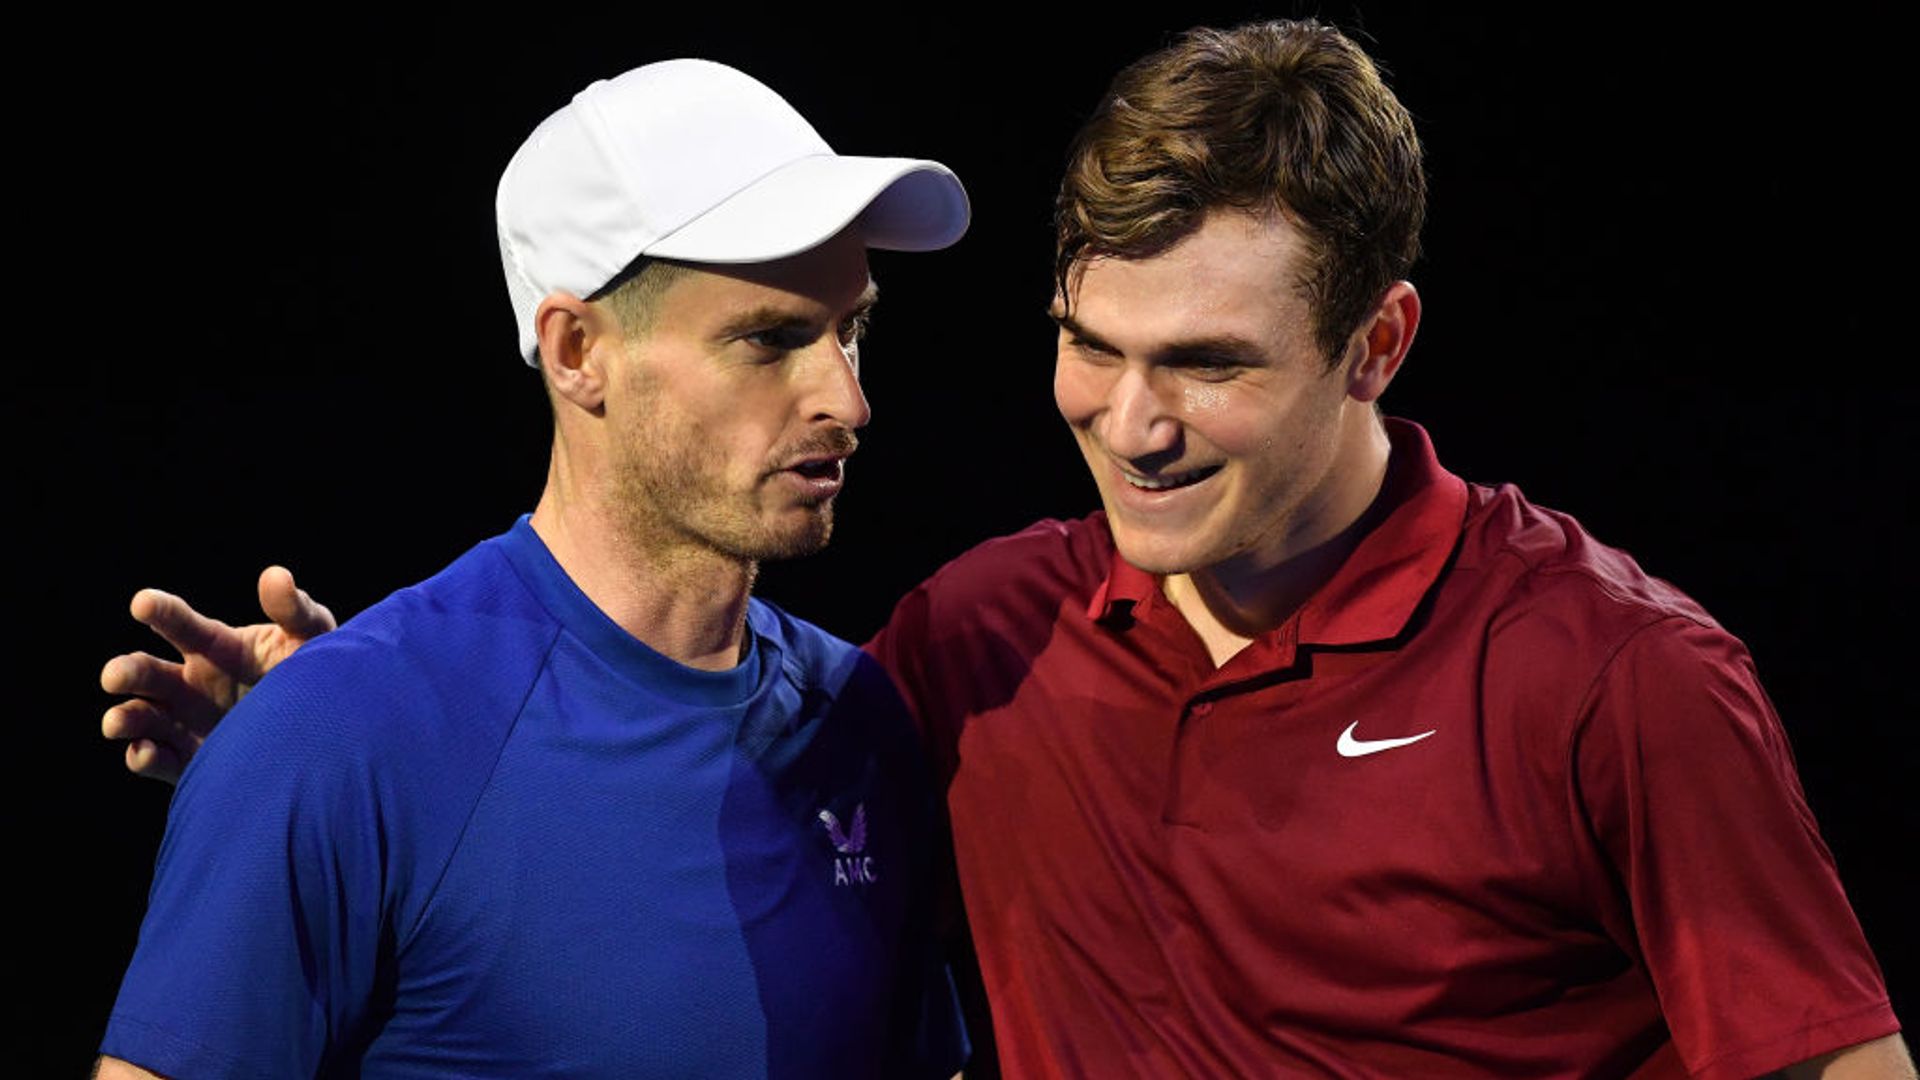 Draper: Murray inspires me to achieve great things in tennis